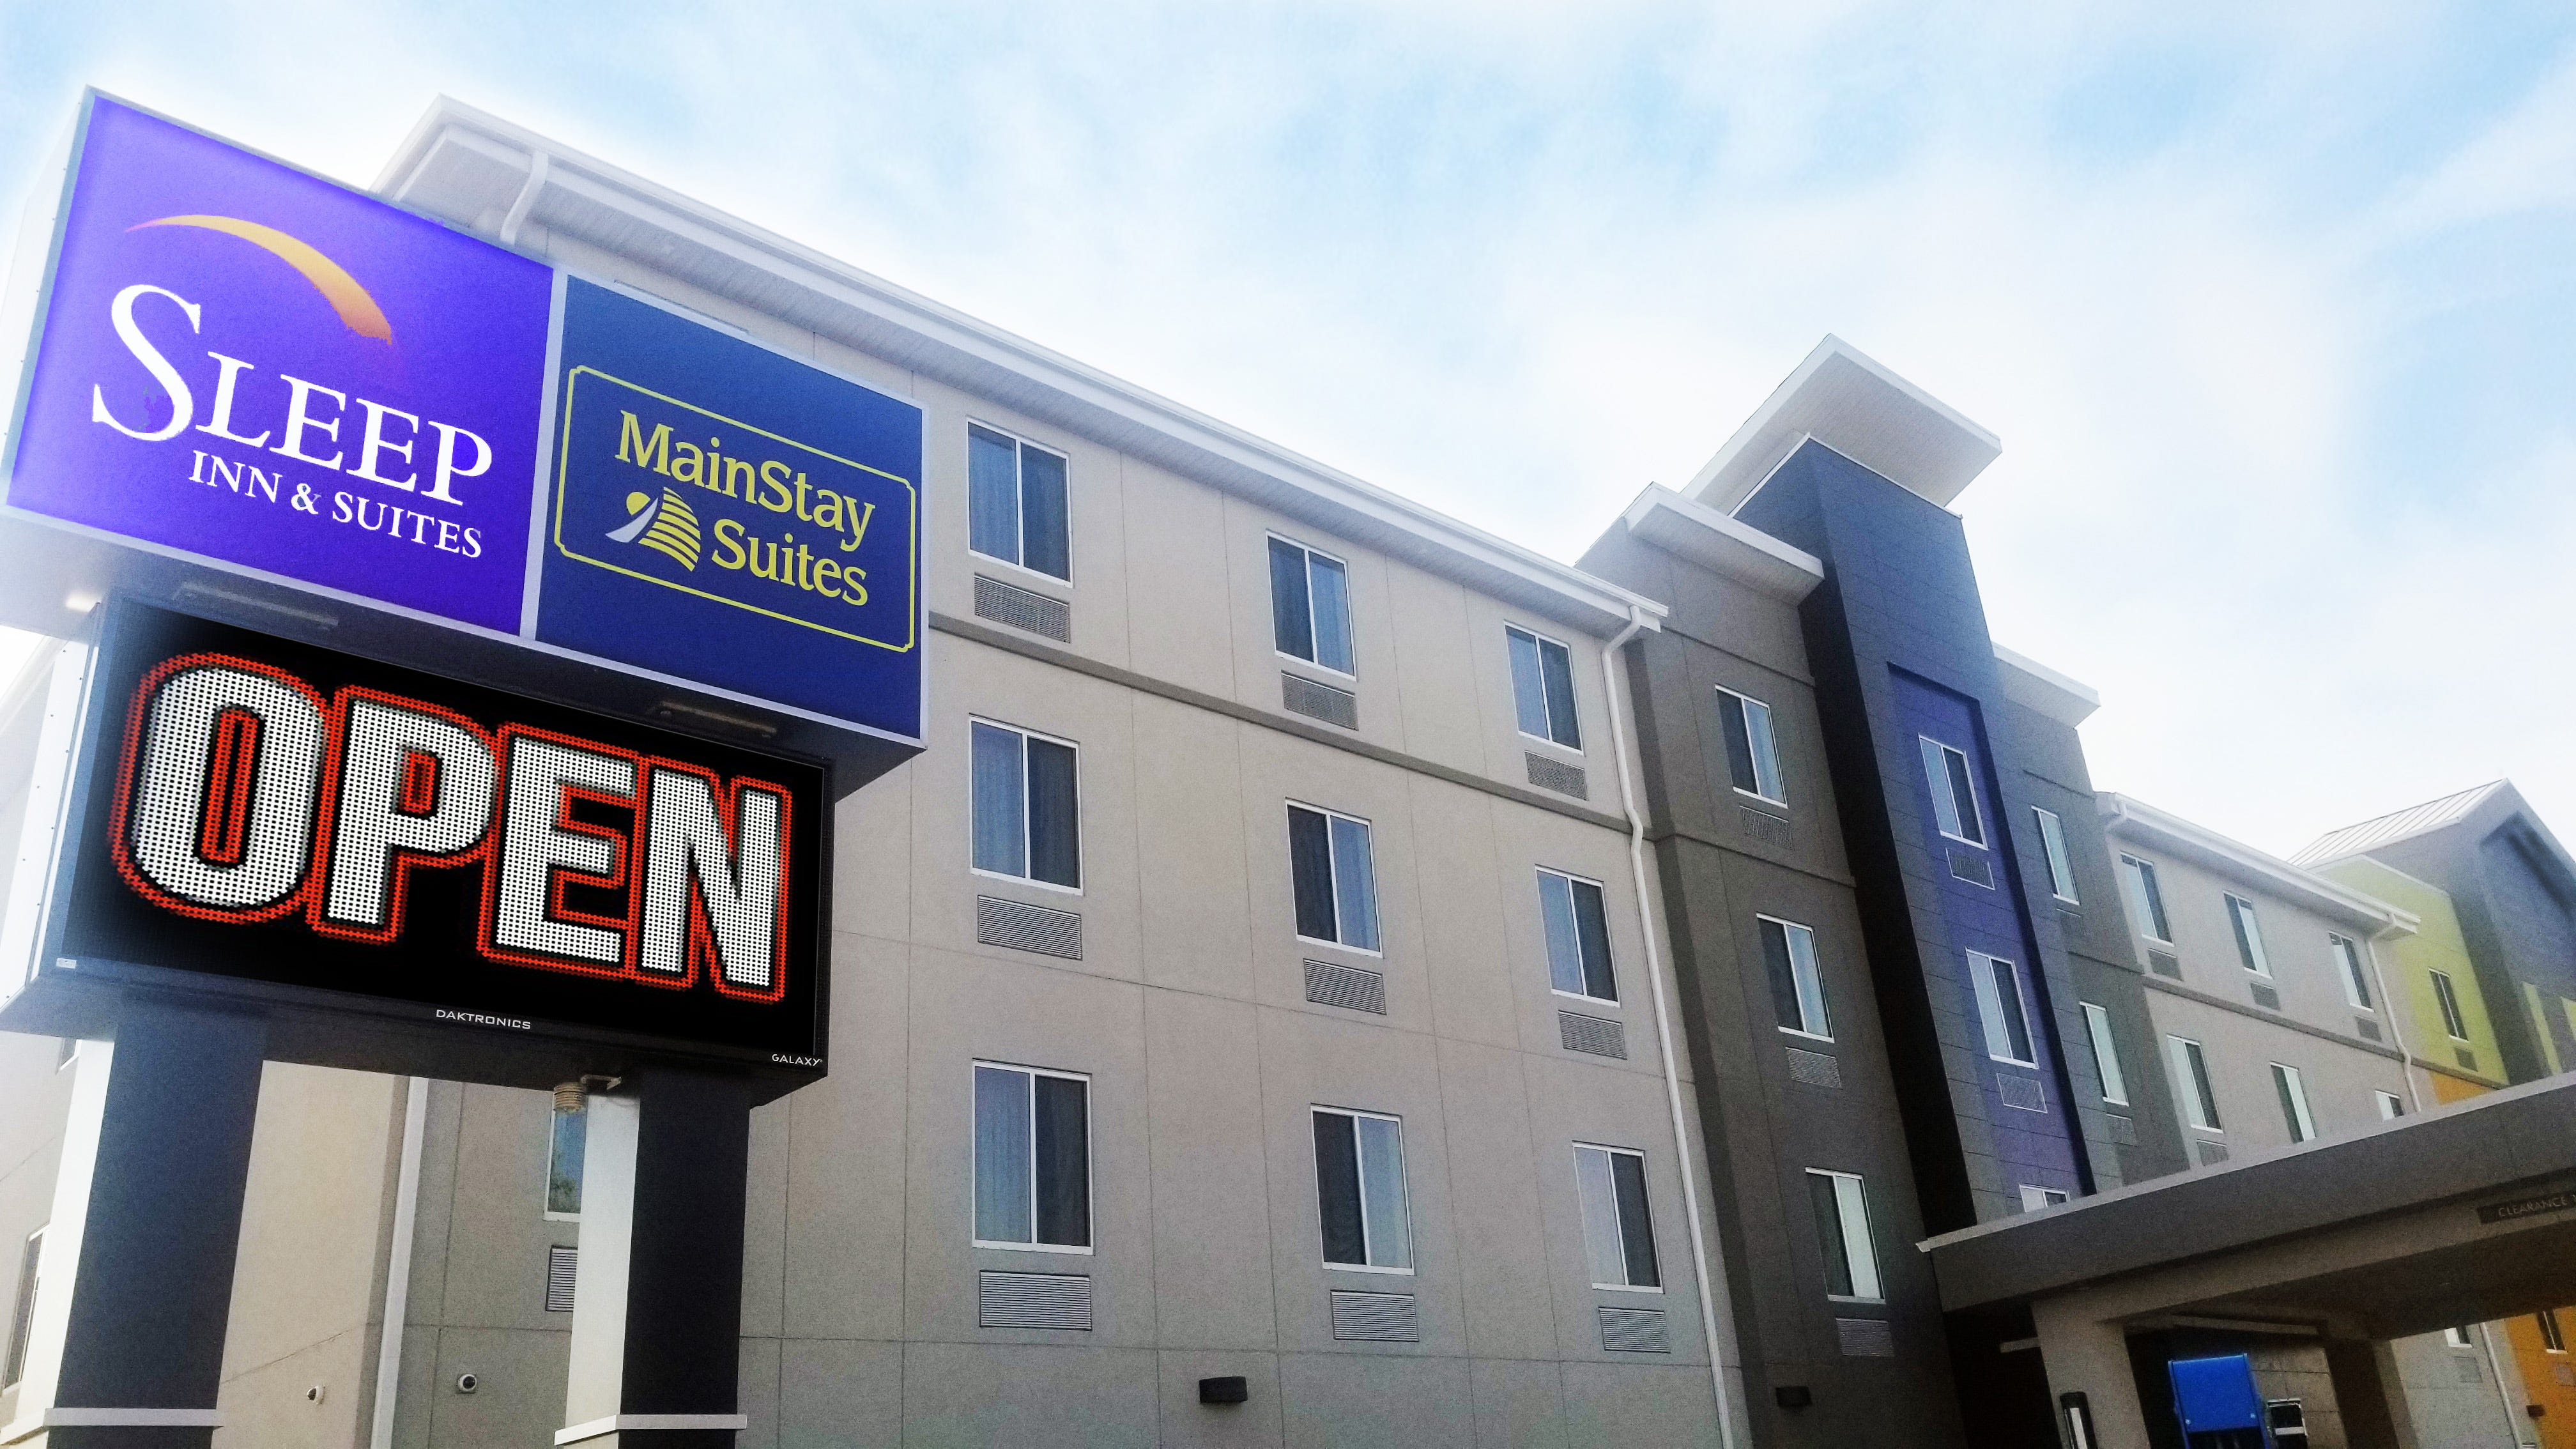 MainStay Suites/Sleep Inn hotel opens in Great Falls after long delay.